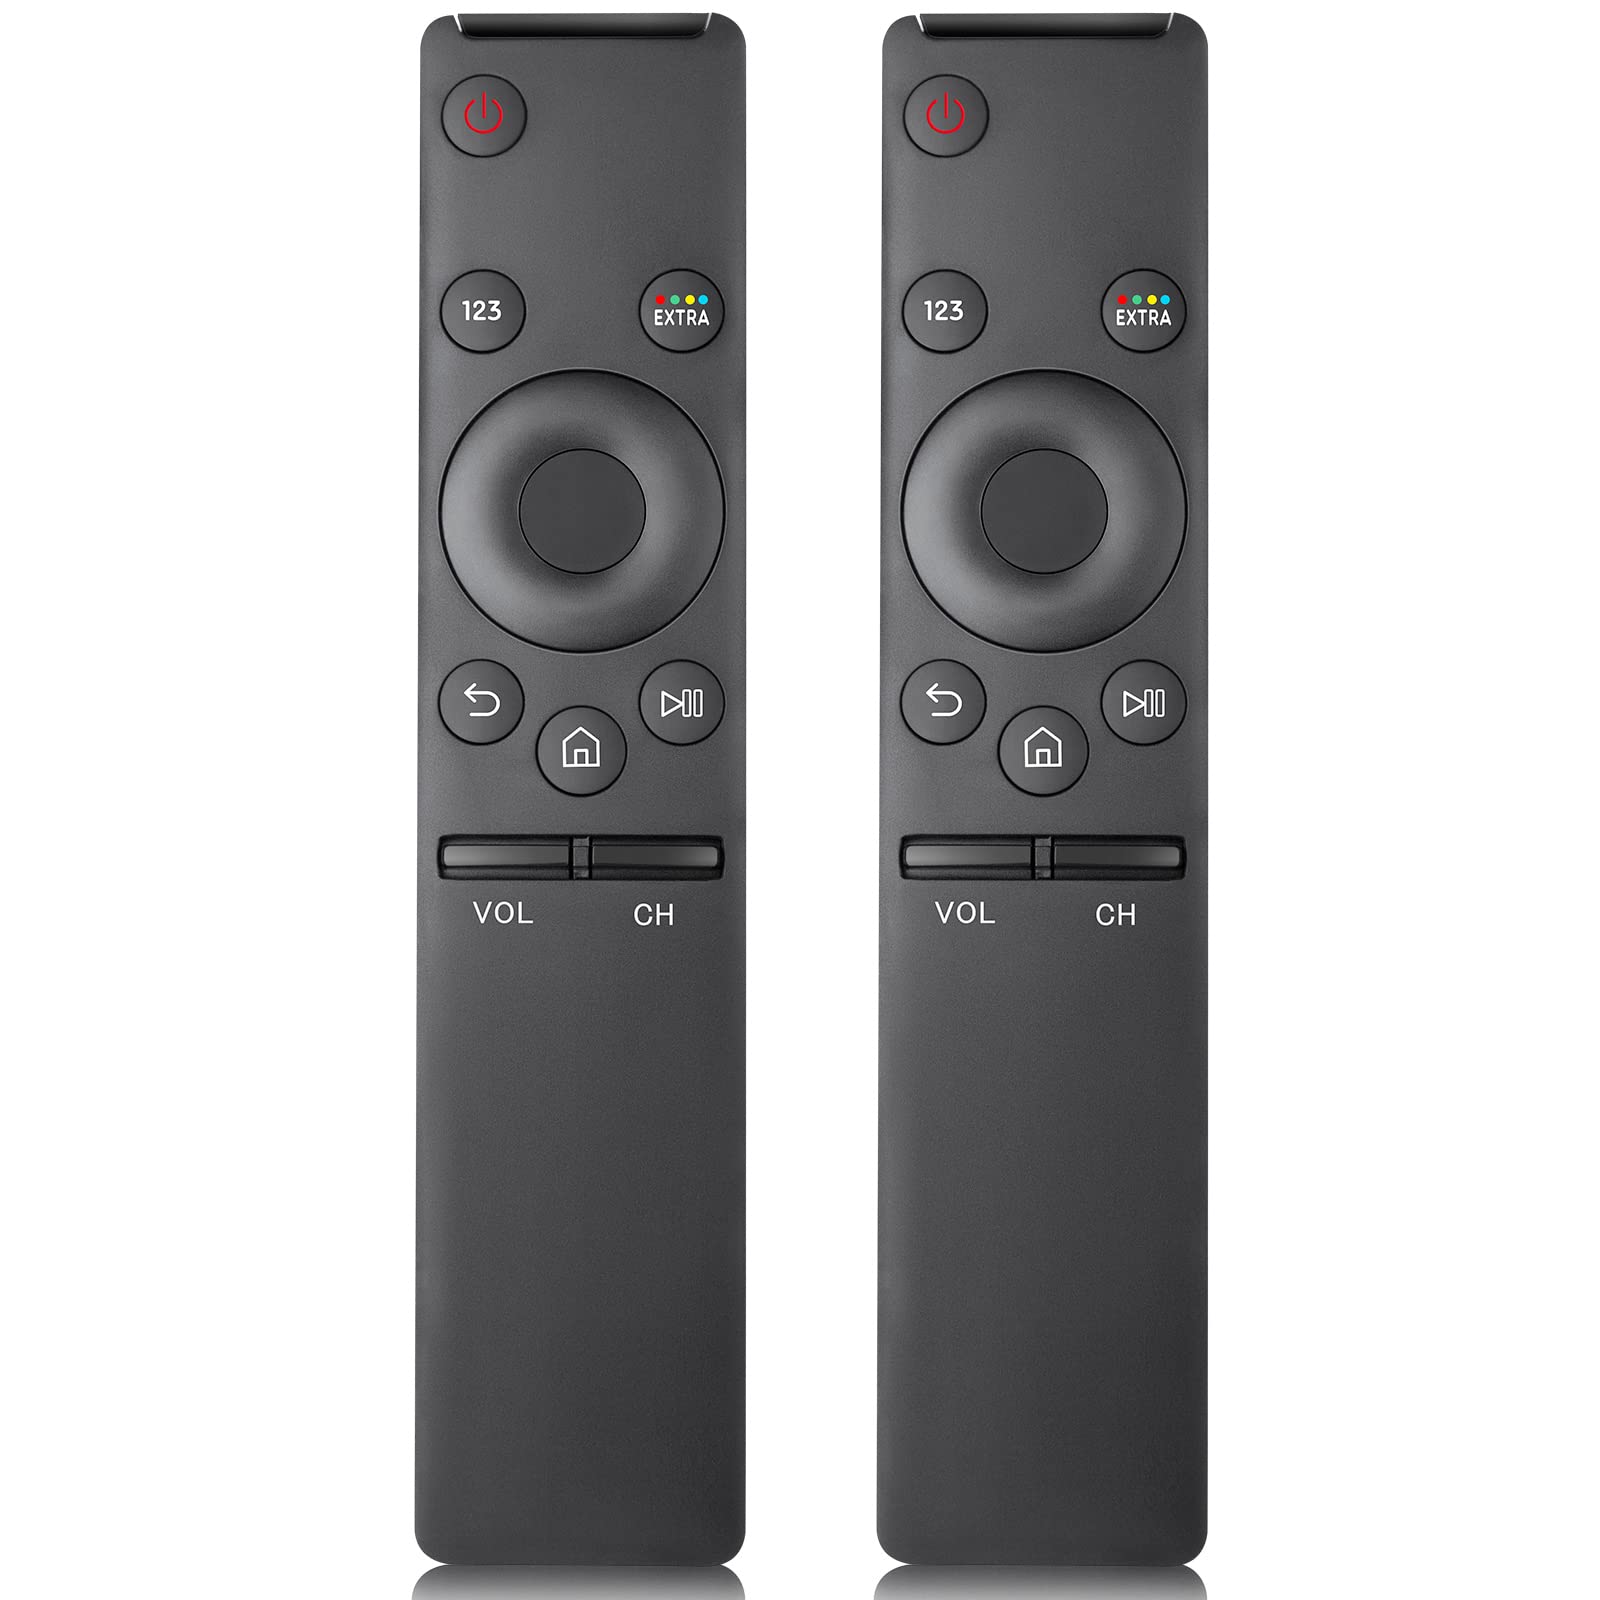 Universal Replacement for Samsung-TV-Remote Control,Compatible with All Samsung Smart Frame Curved QLED TVs 【Pack of 2】